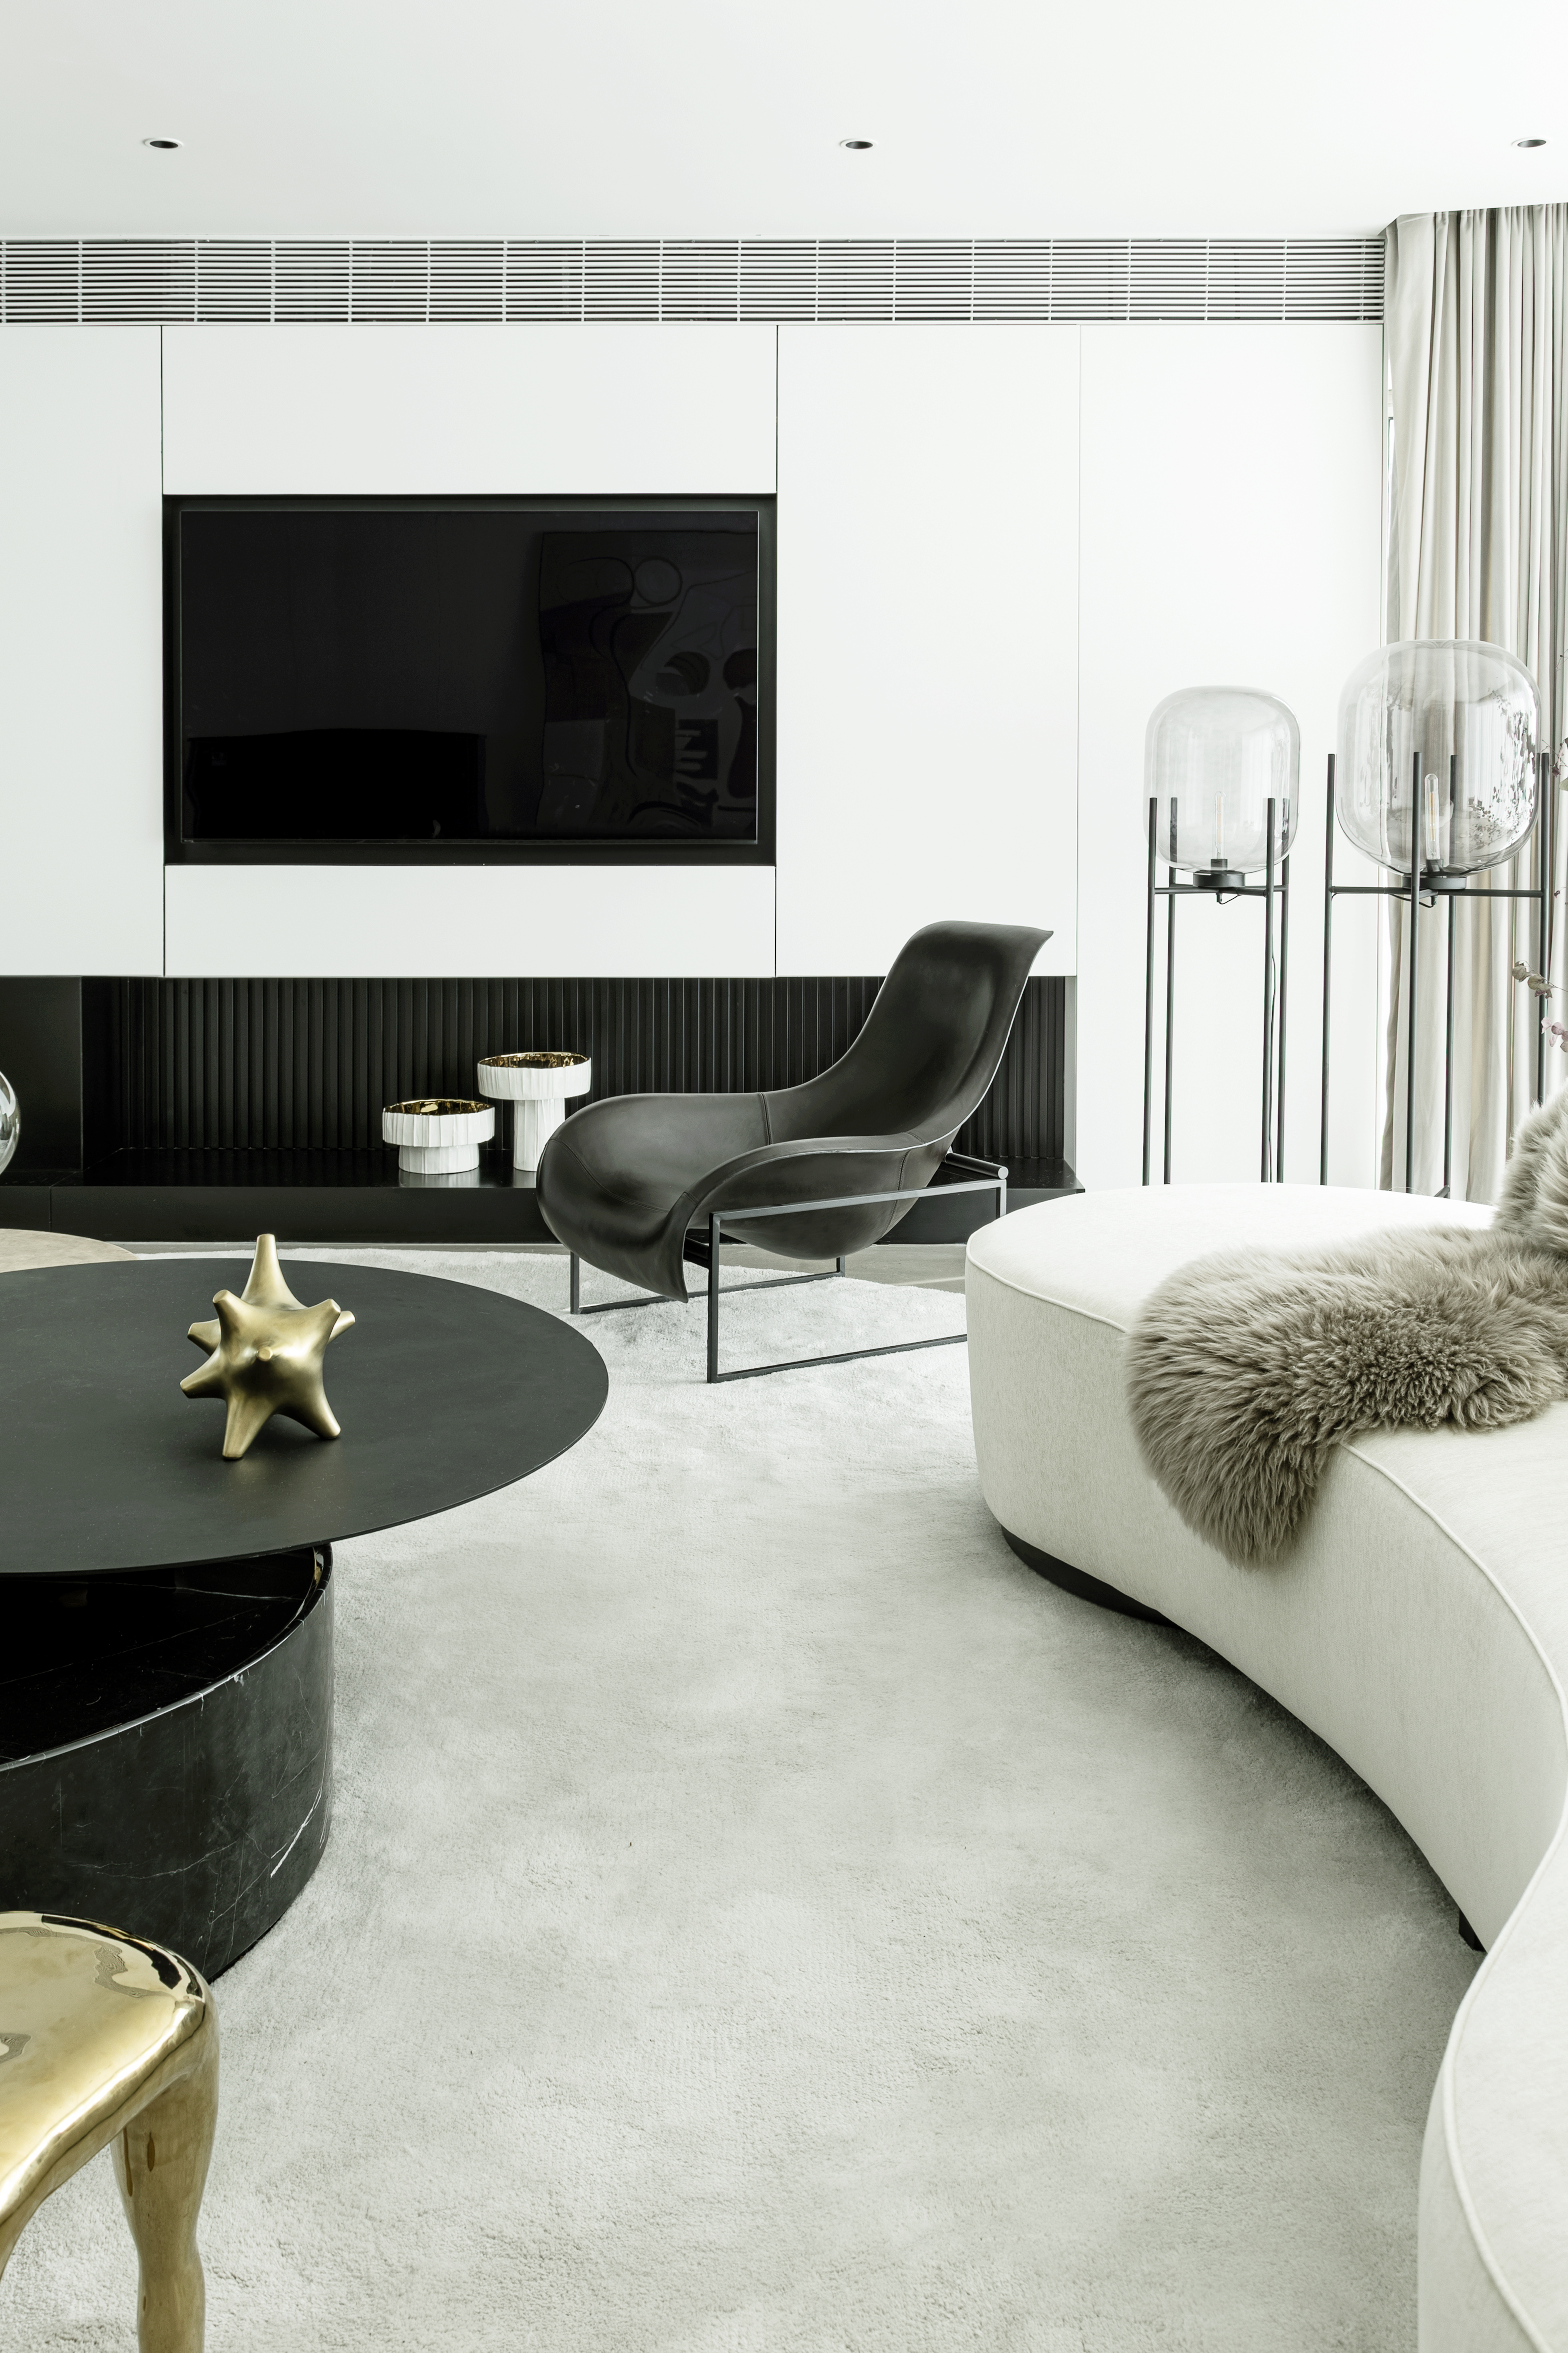 The pursuit of happiness reflected in the luxury apartment by Muxin Studio - Living Rooom Area